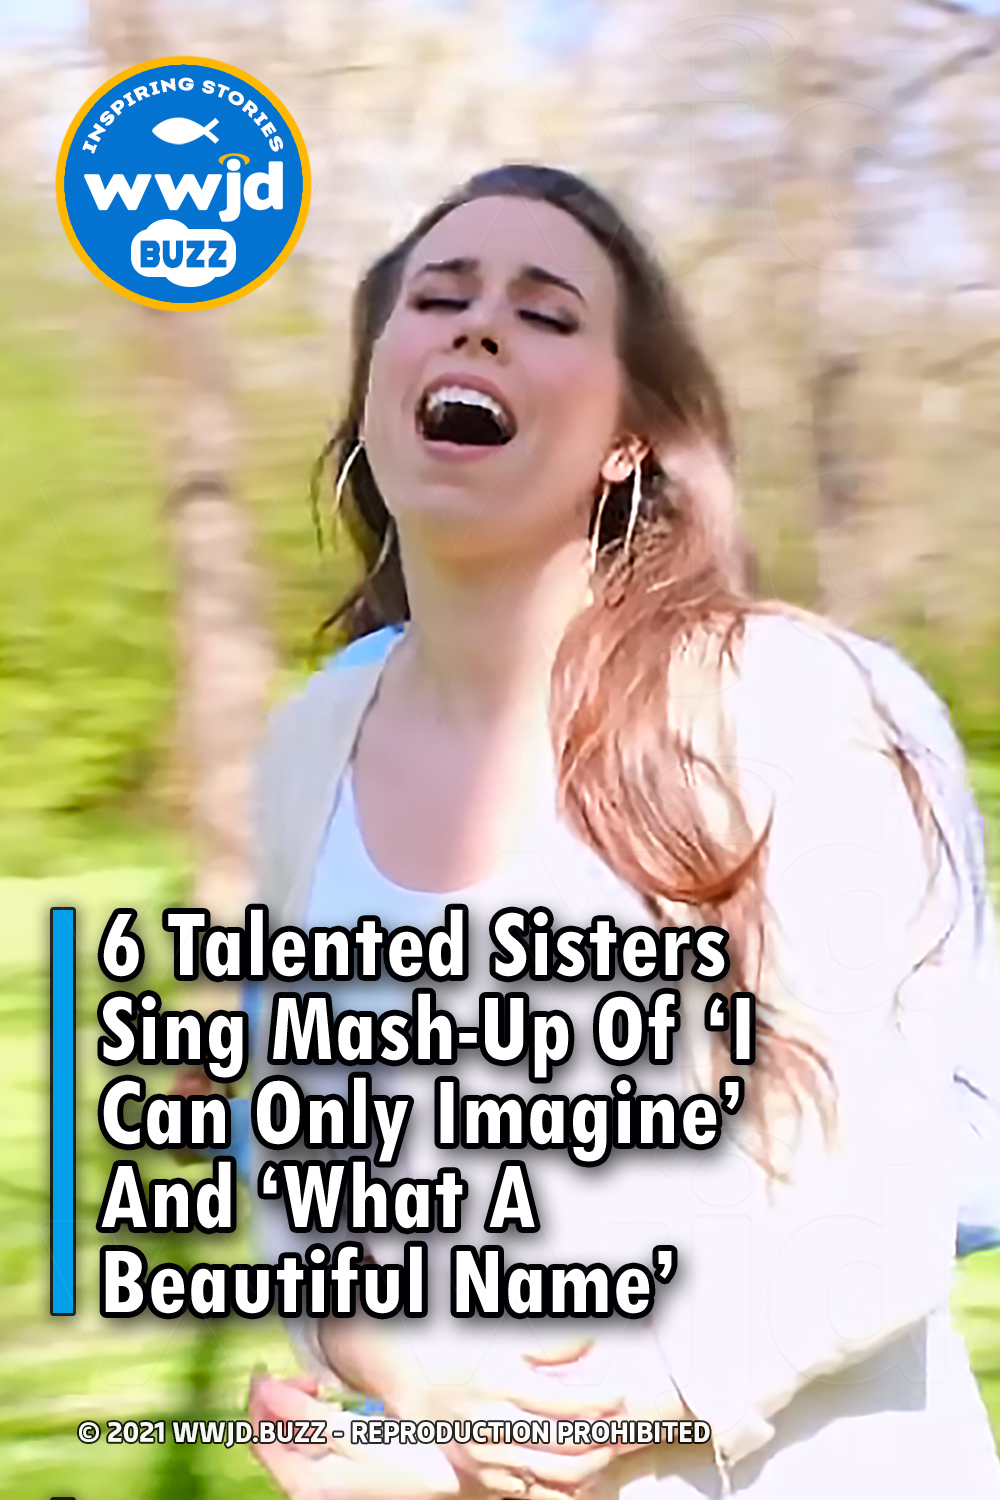 6 Talented Sisters Sing Mash-Up Of ‘I Can Only Imagine’ And ‘What A Beautiful Name’